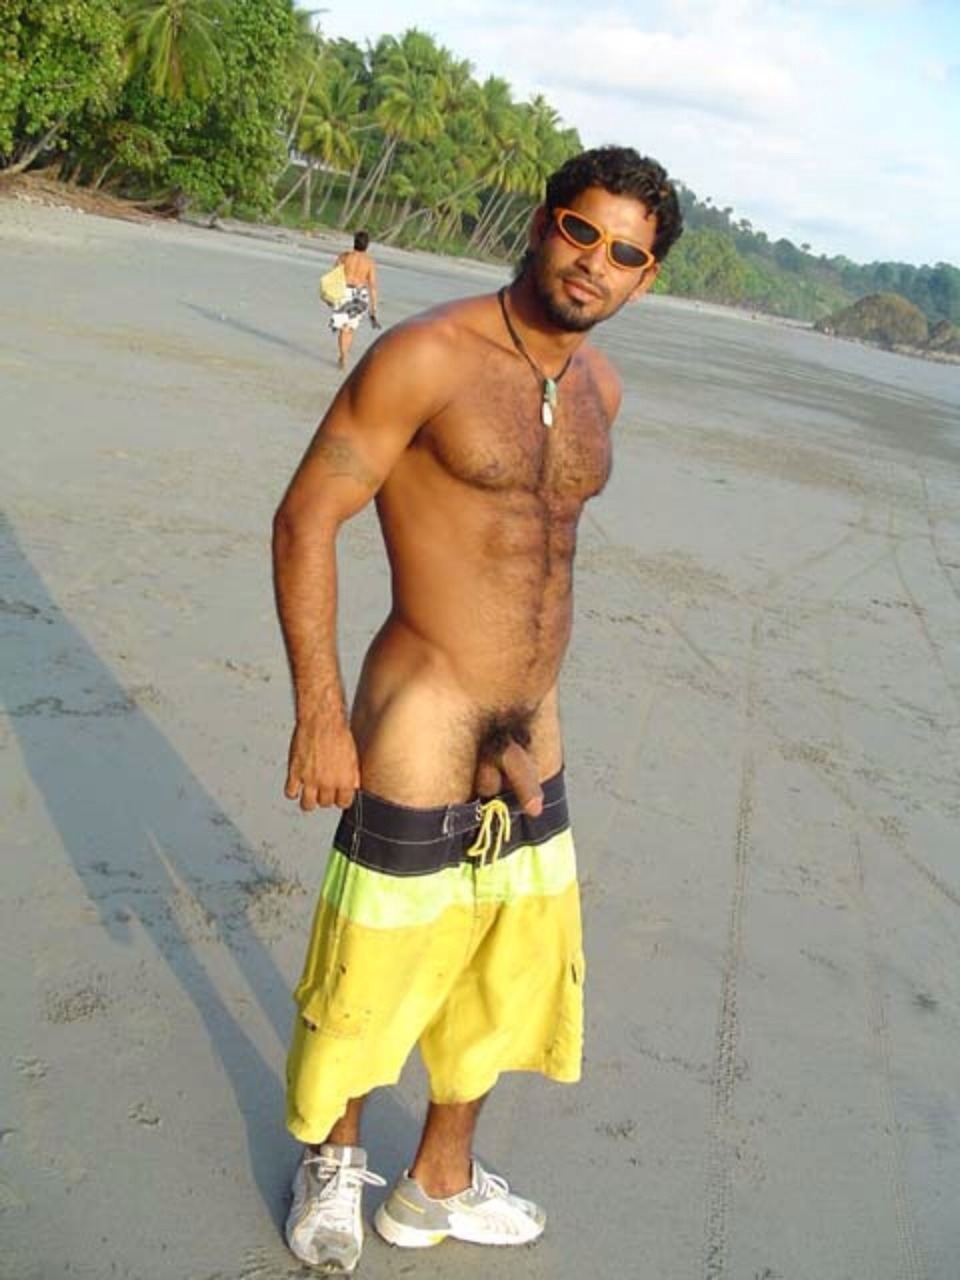 Nude middle eastern men hot guys